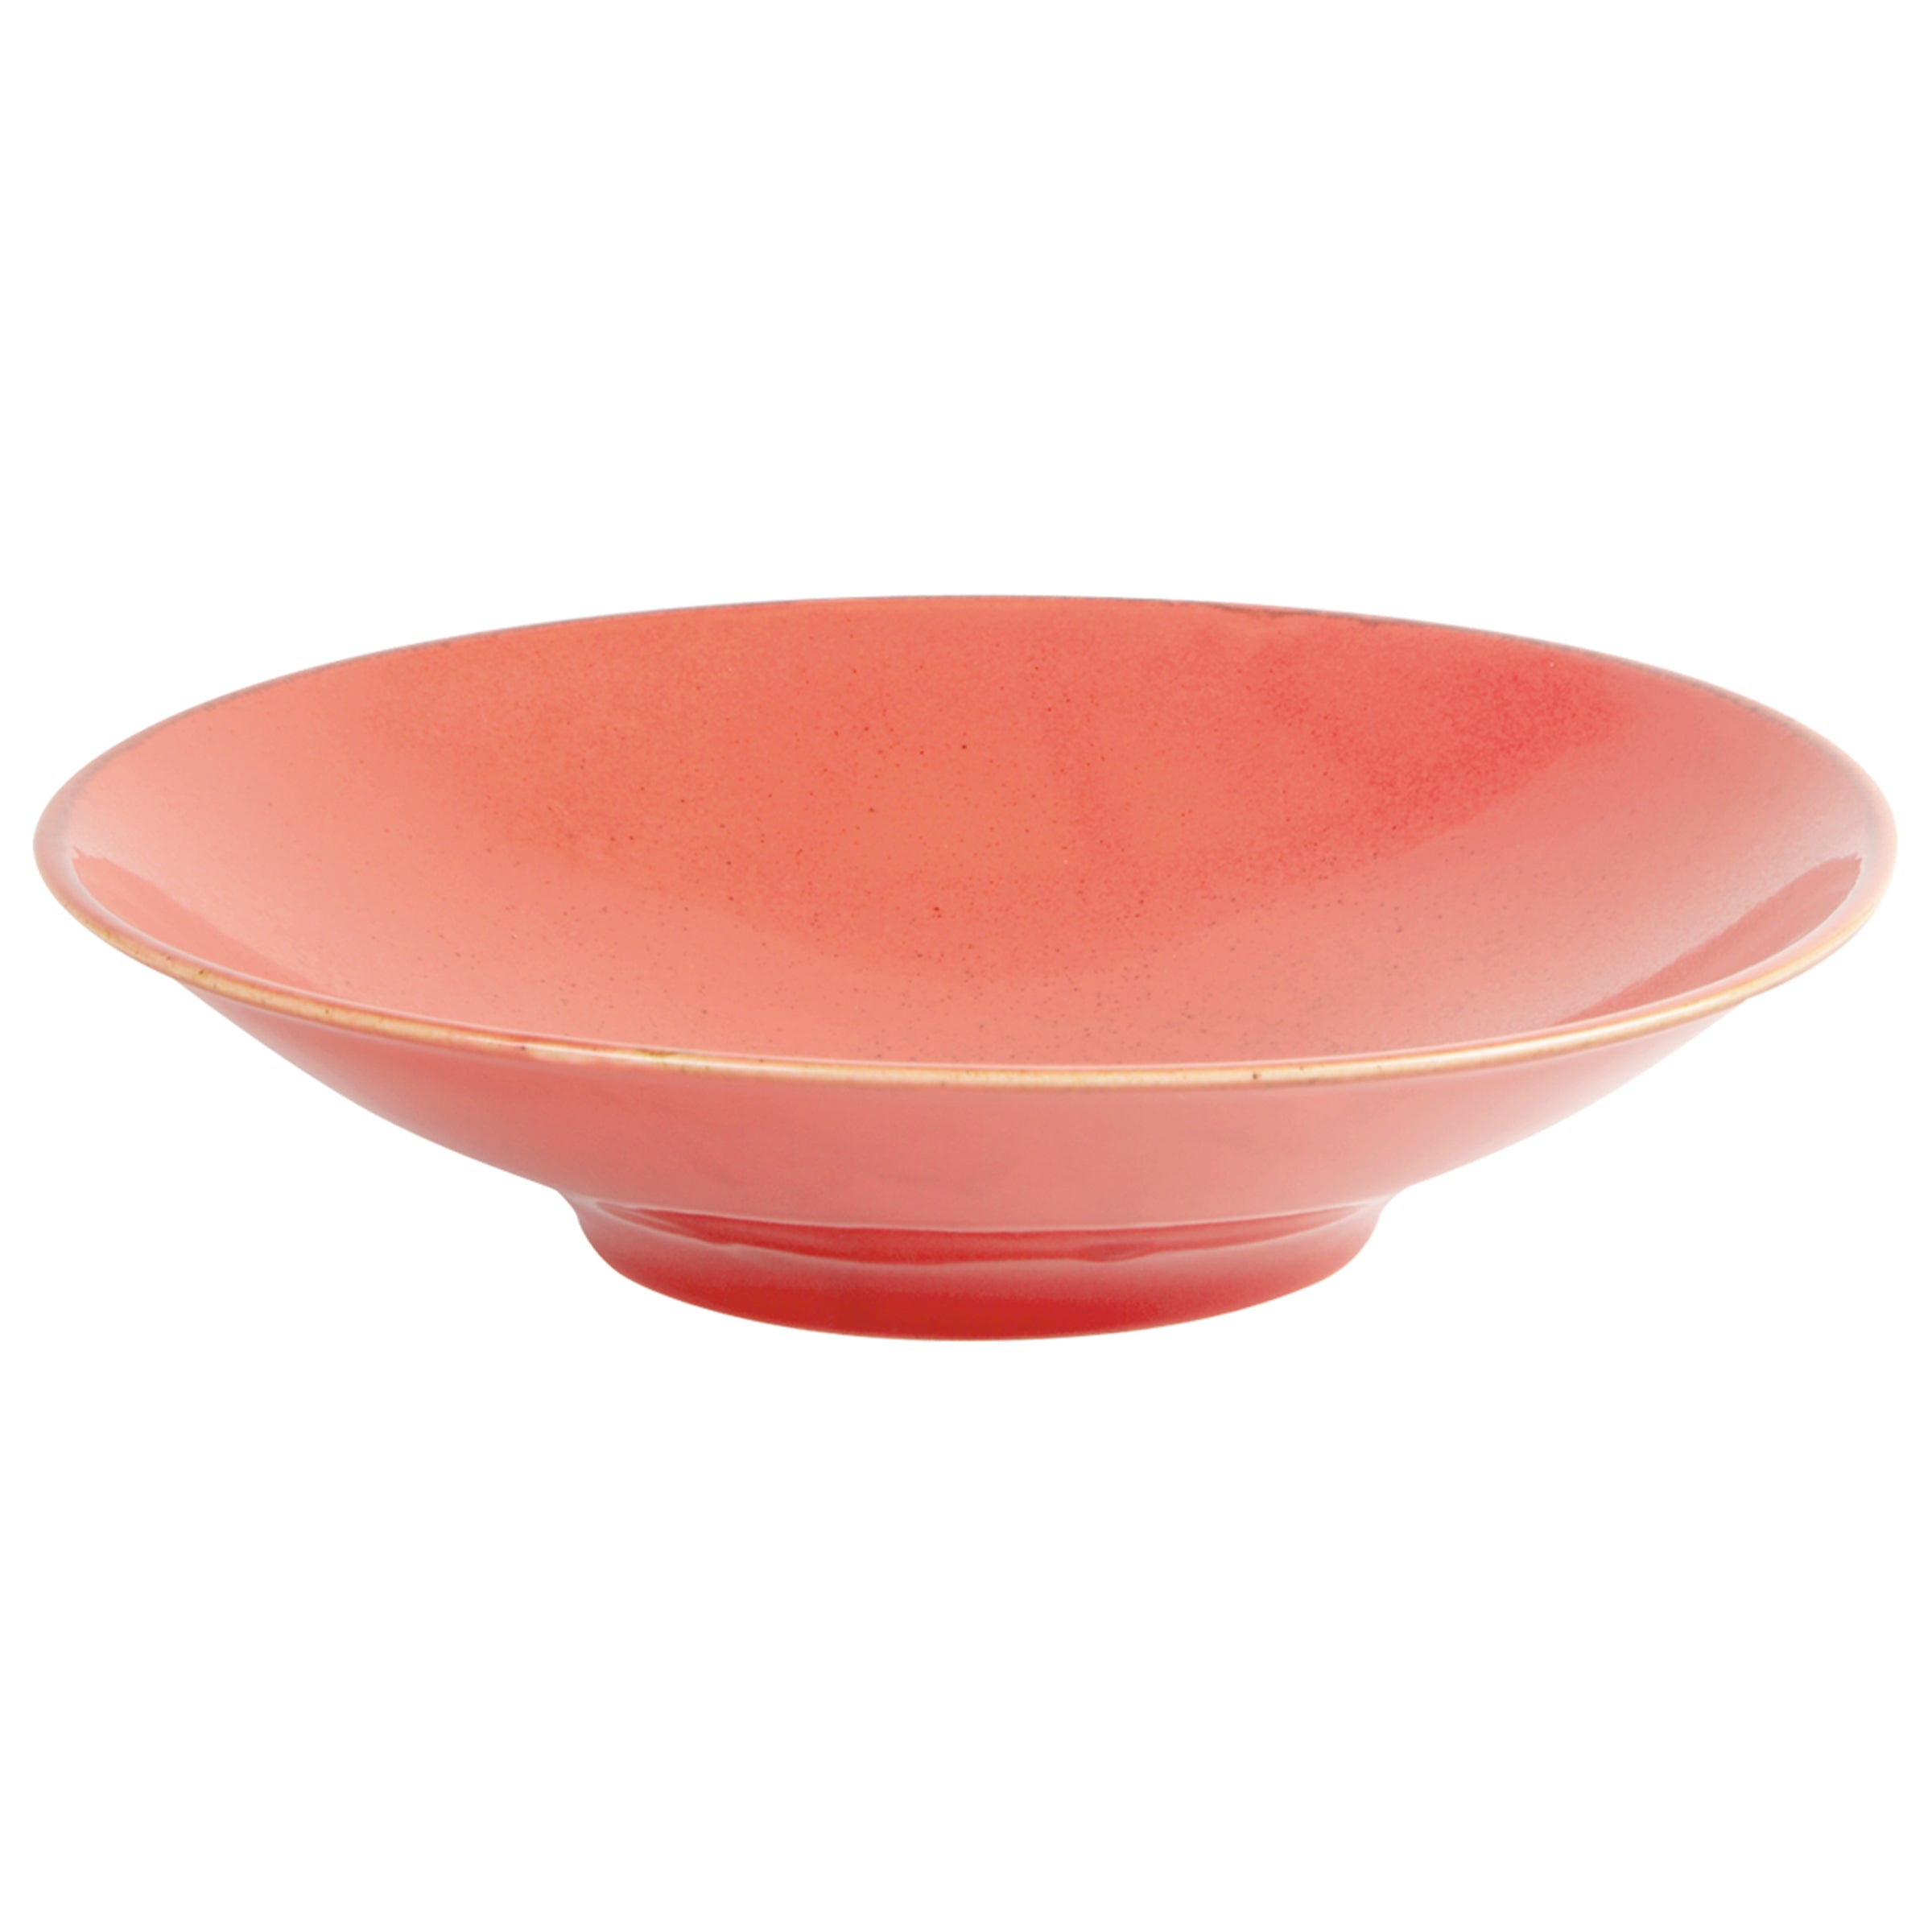 Seasons Coral Footed Bowl 26cm 368126CO Pack Size  6